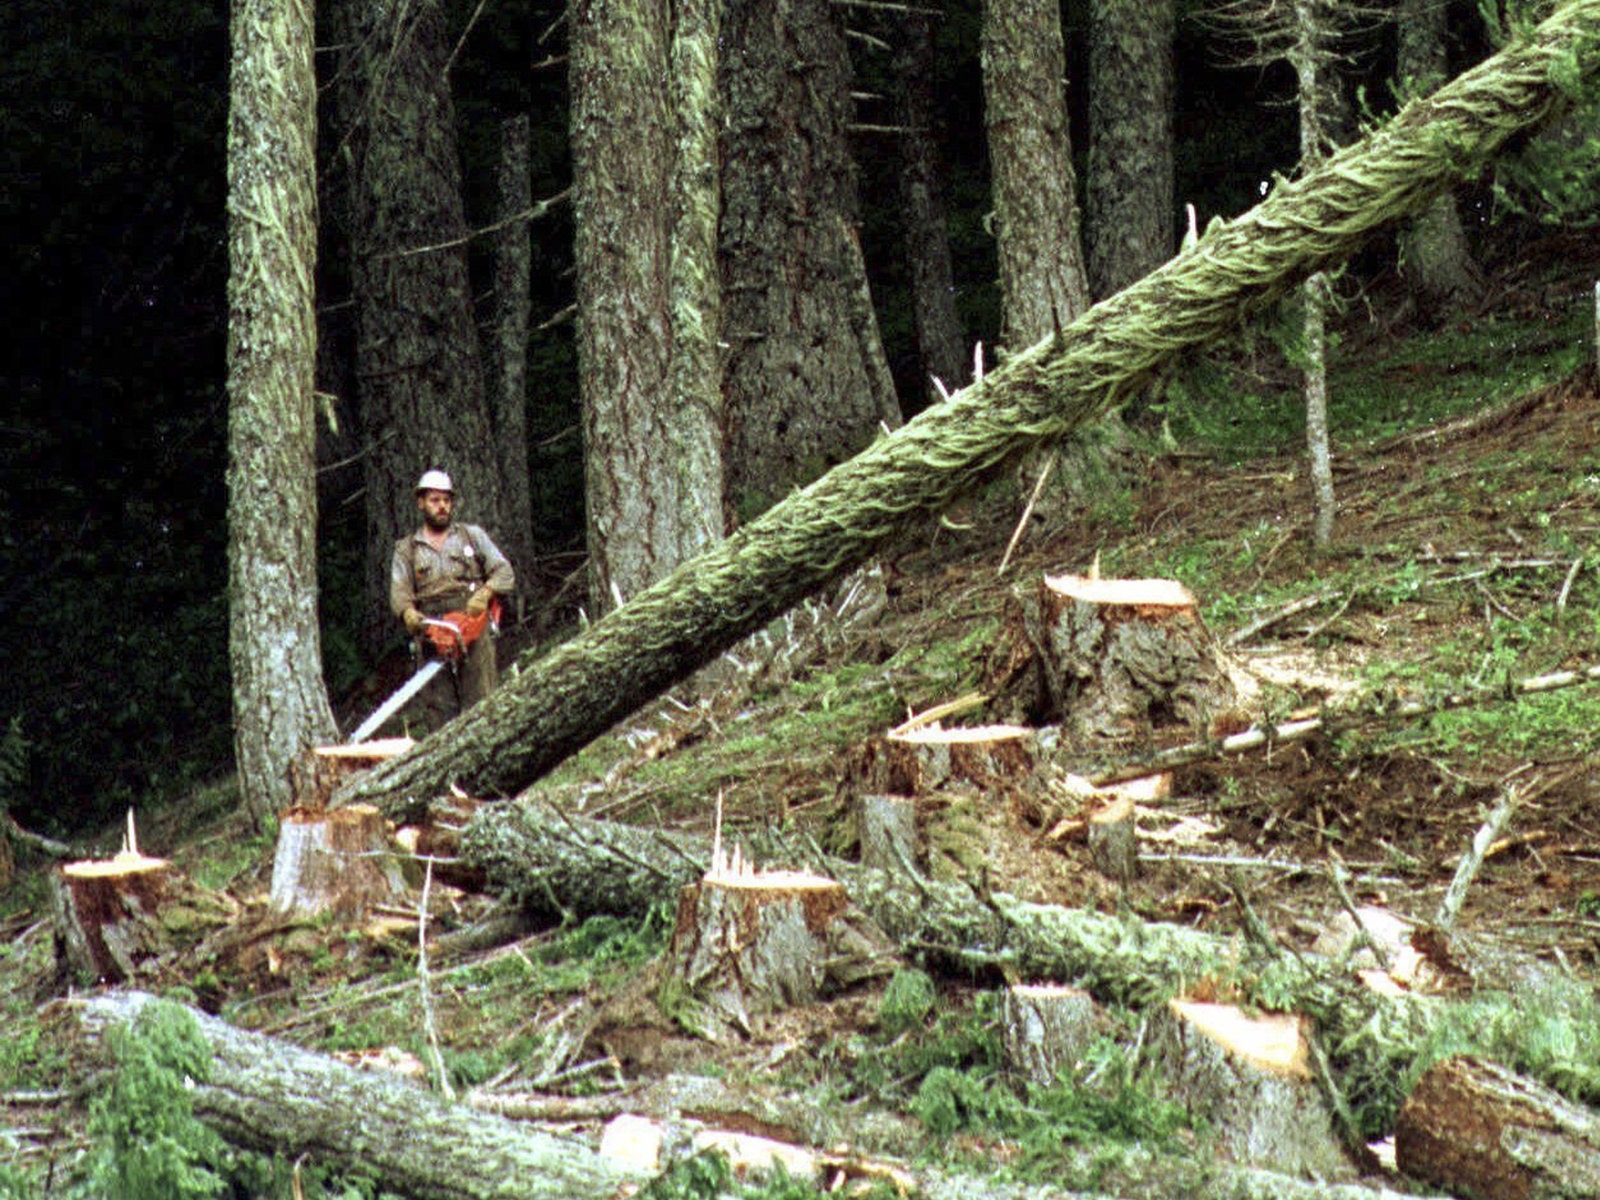 A logger cuts a large fir tree in the Umpqua National Forest near Oakridge, Ore. Federal land managers are proposing a sweeping rule change that could expand commercial logging on Forest Service land. Don Ryan/AP